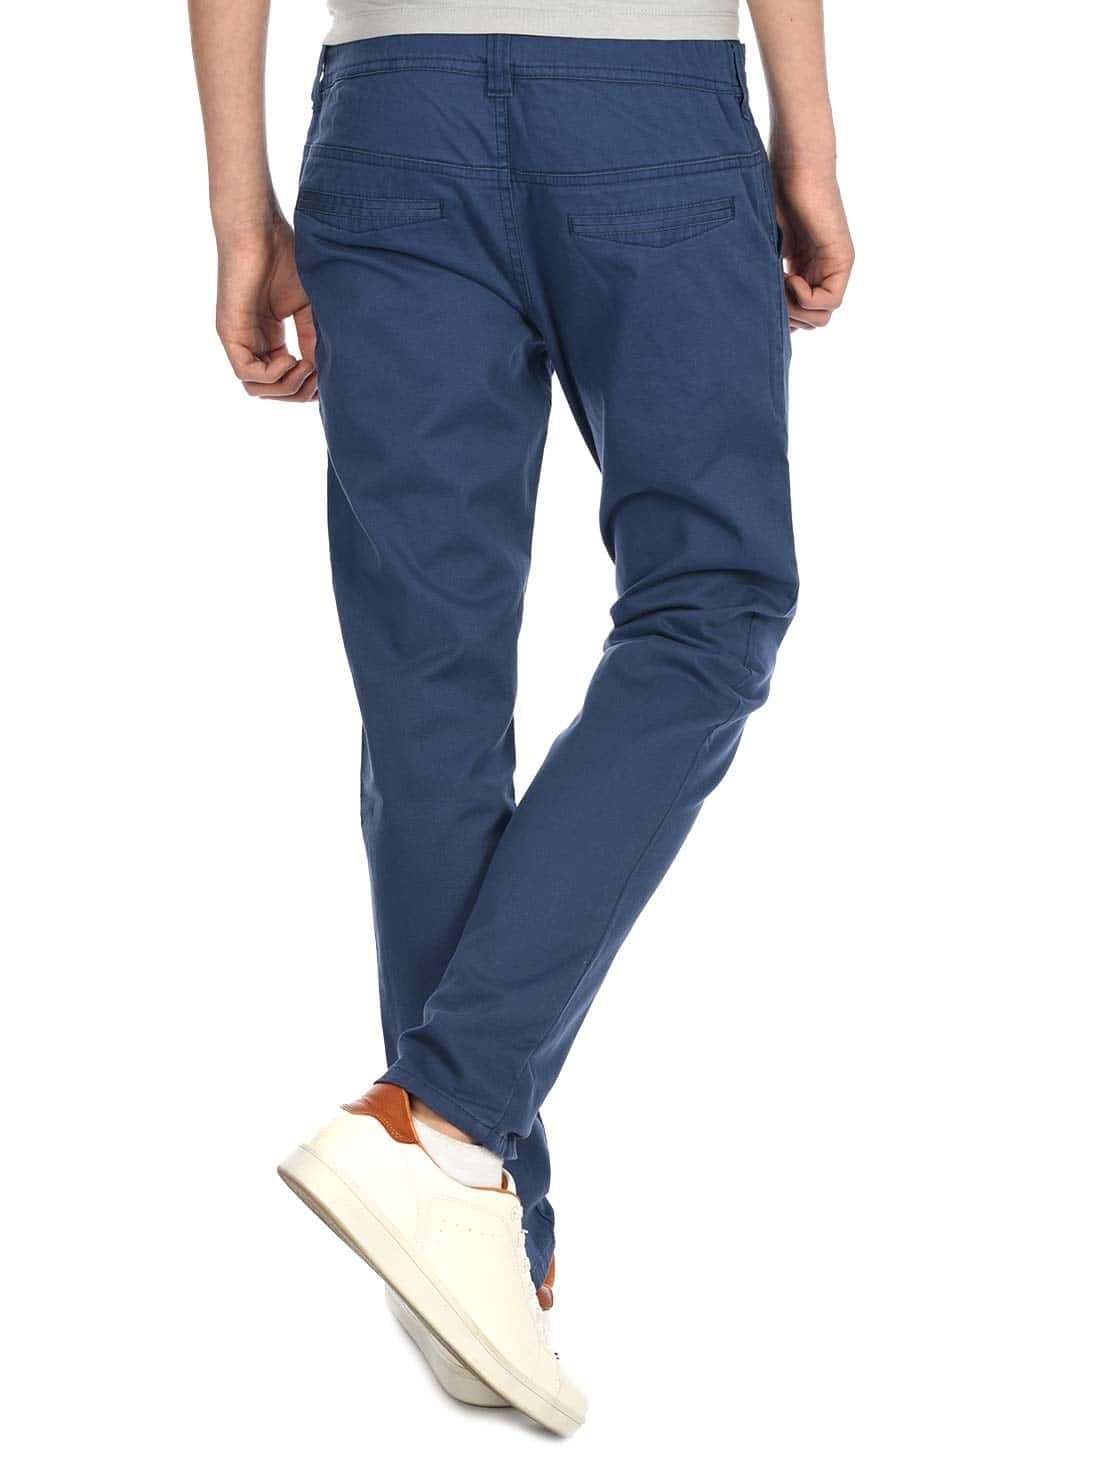 Jungen Chinohose BEZLIT Hose Jeansblau Chino casual (1-tlg)